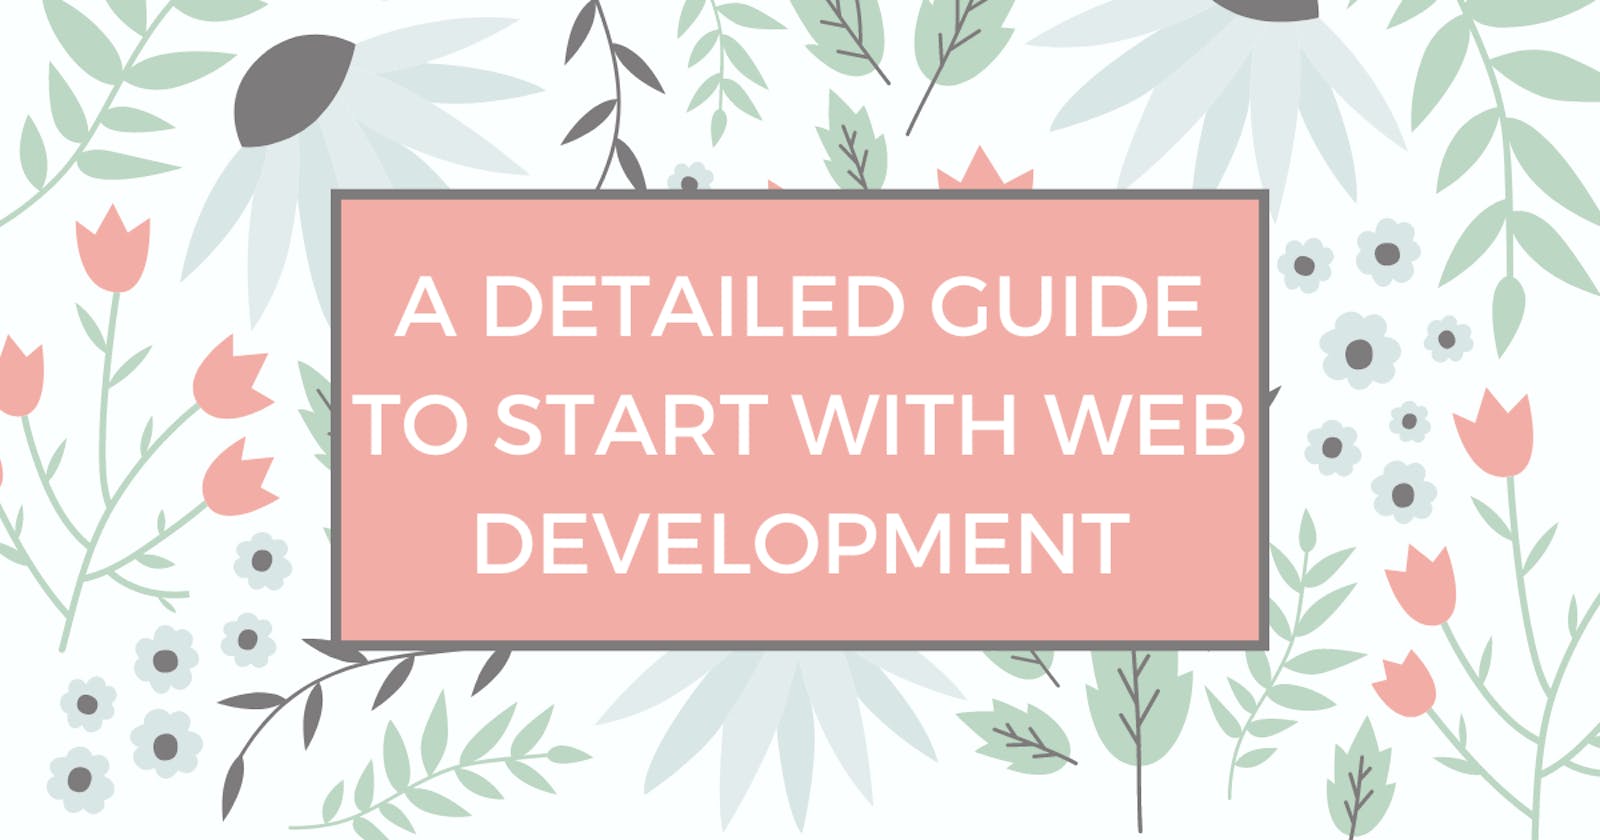 A detailed guide to start with WEB DEVELOPMENT